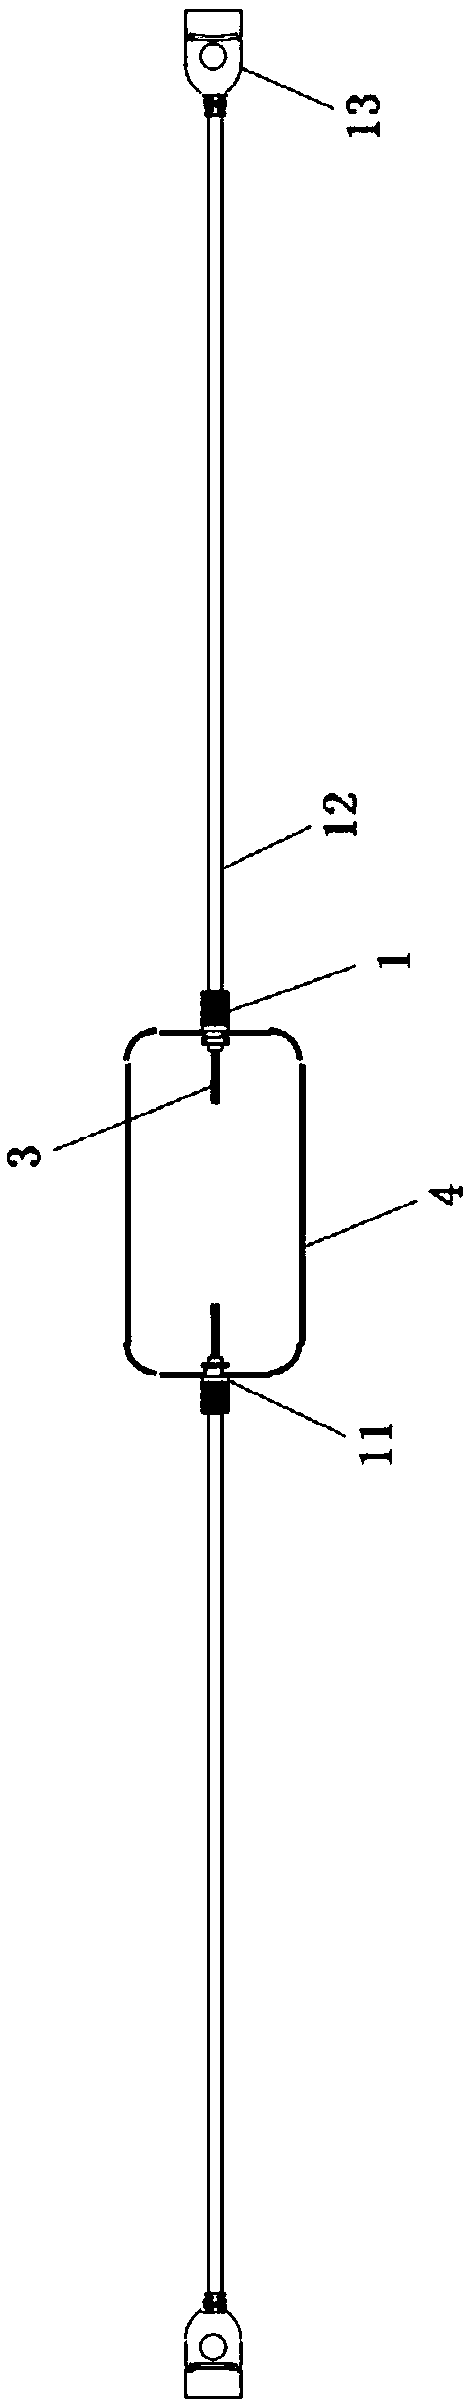 Joint with sealing structure and junction box with joint